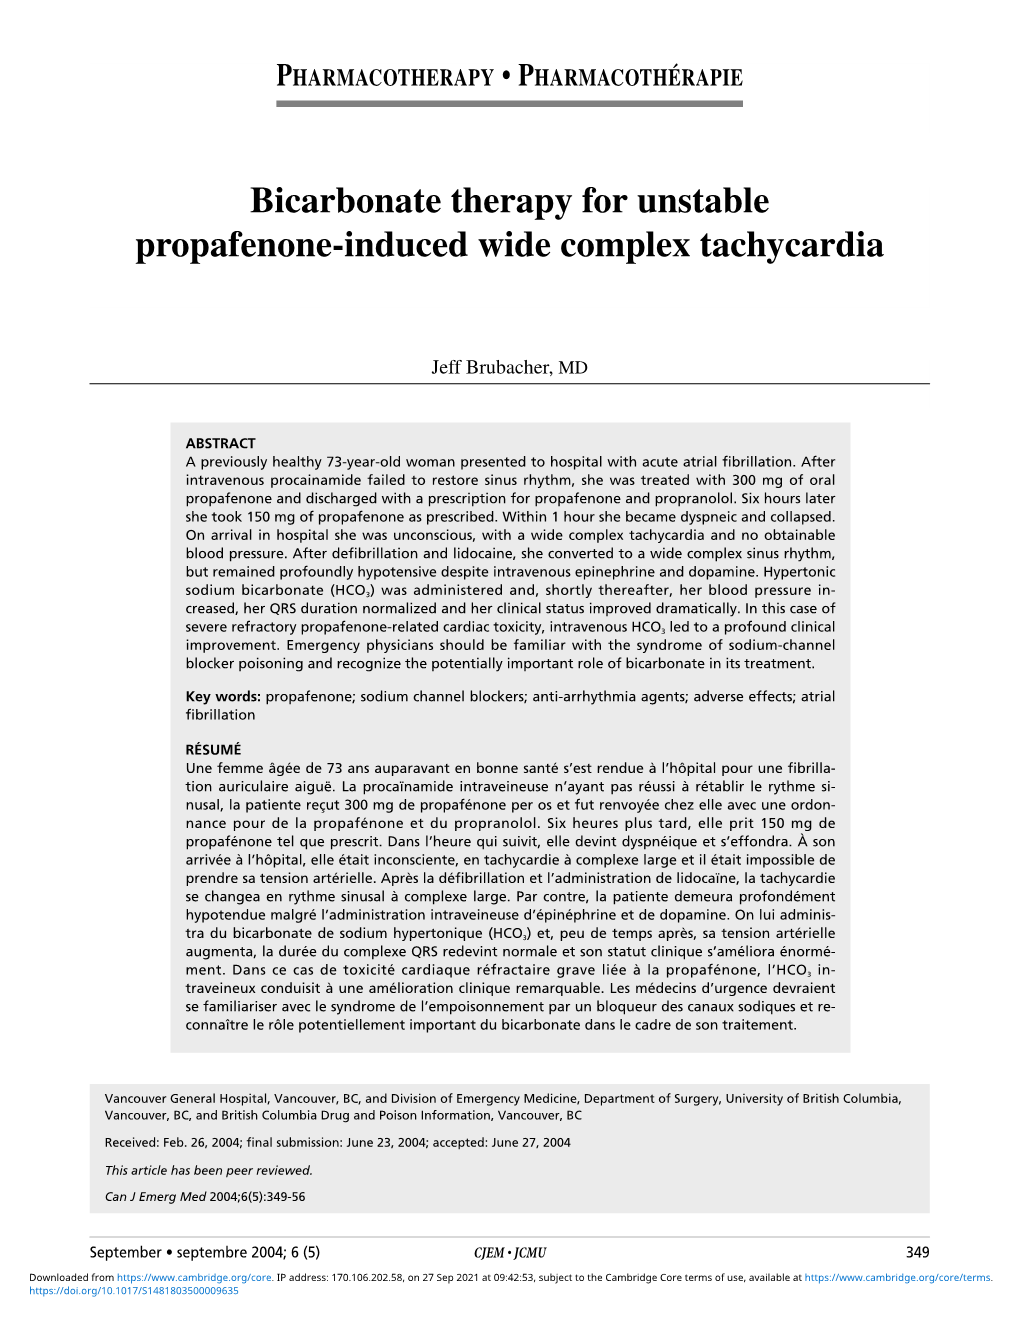 Bicarbonate Therapy for Unstable Propafenone-Induced Wide Complex Tachycardia